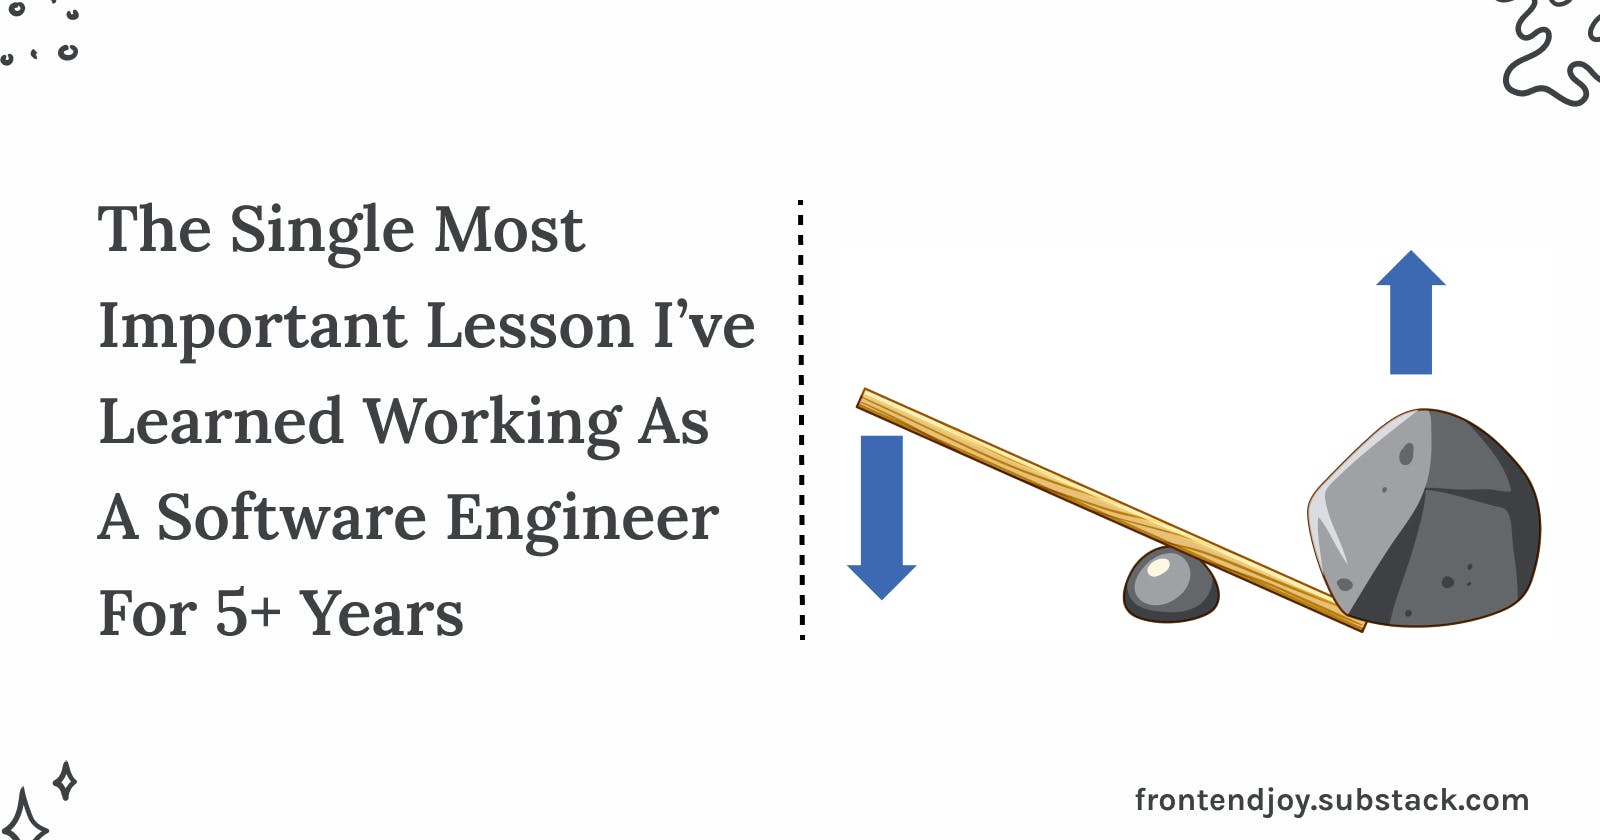 The Single Most Important Lesson I’ve Learned Working As A Software Engineer For 5+ Years